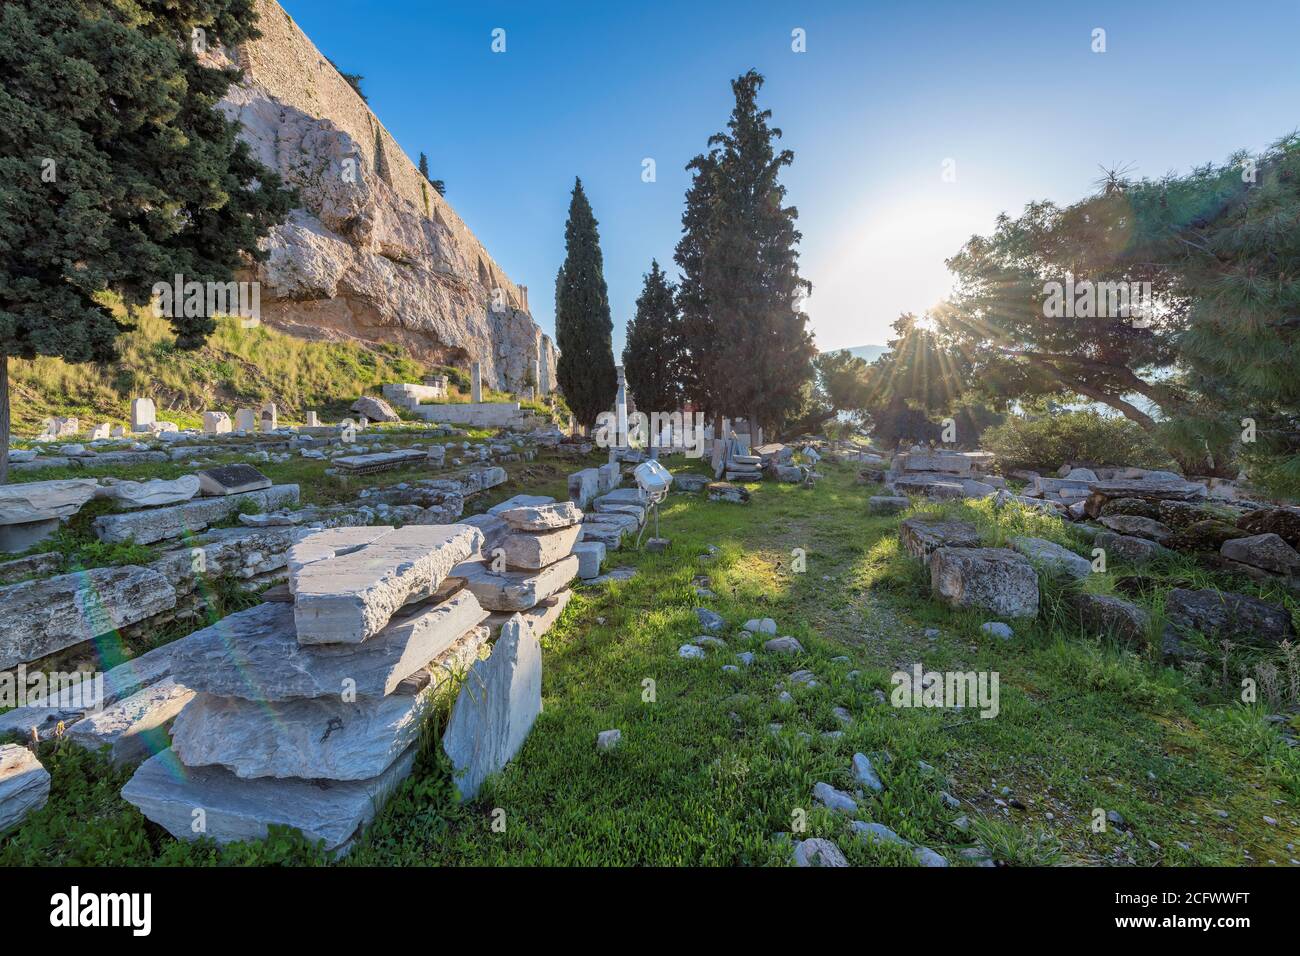 Ancient ruins in Acropolis hill in Athens, Greece Stock Photo